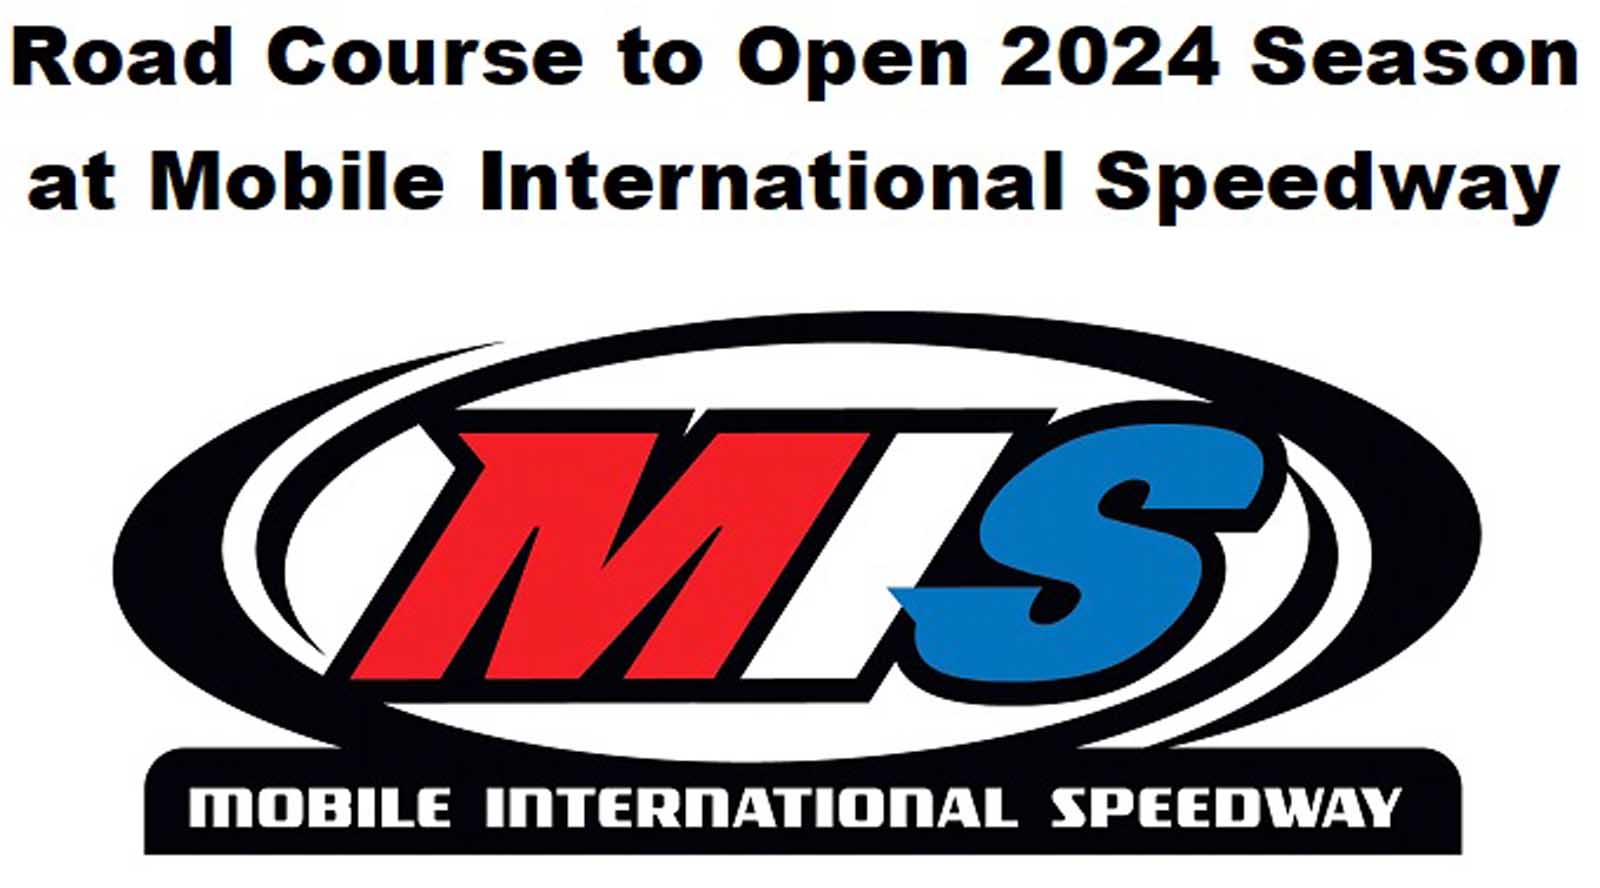 Mobile International Speedway To Open 2024 Season With Road Course Race